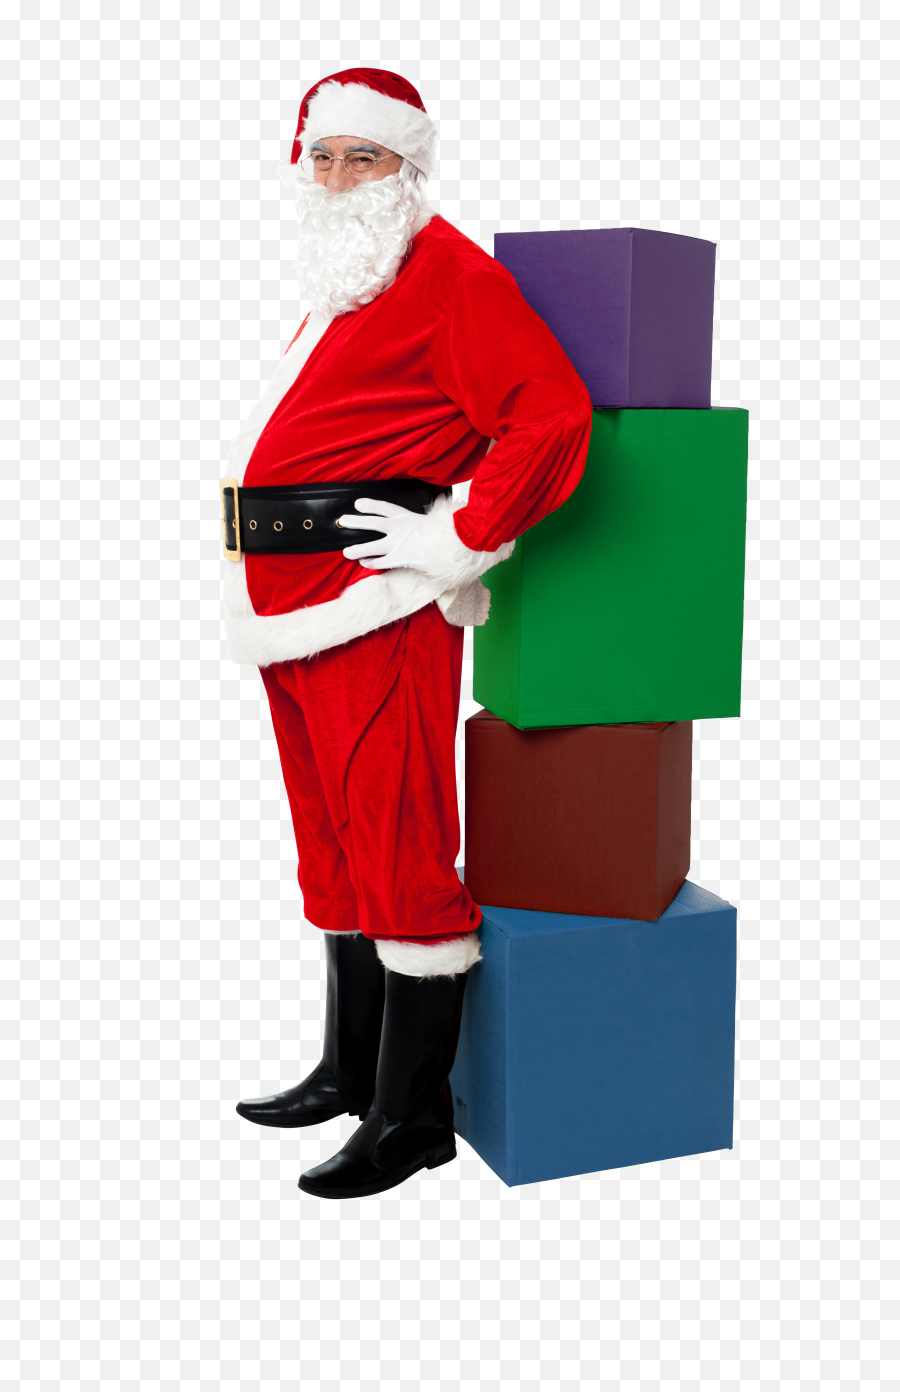 Santa Claus With Four Boxes Png Image - Purepng Free Standing Santa Cc0,Boxes Png